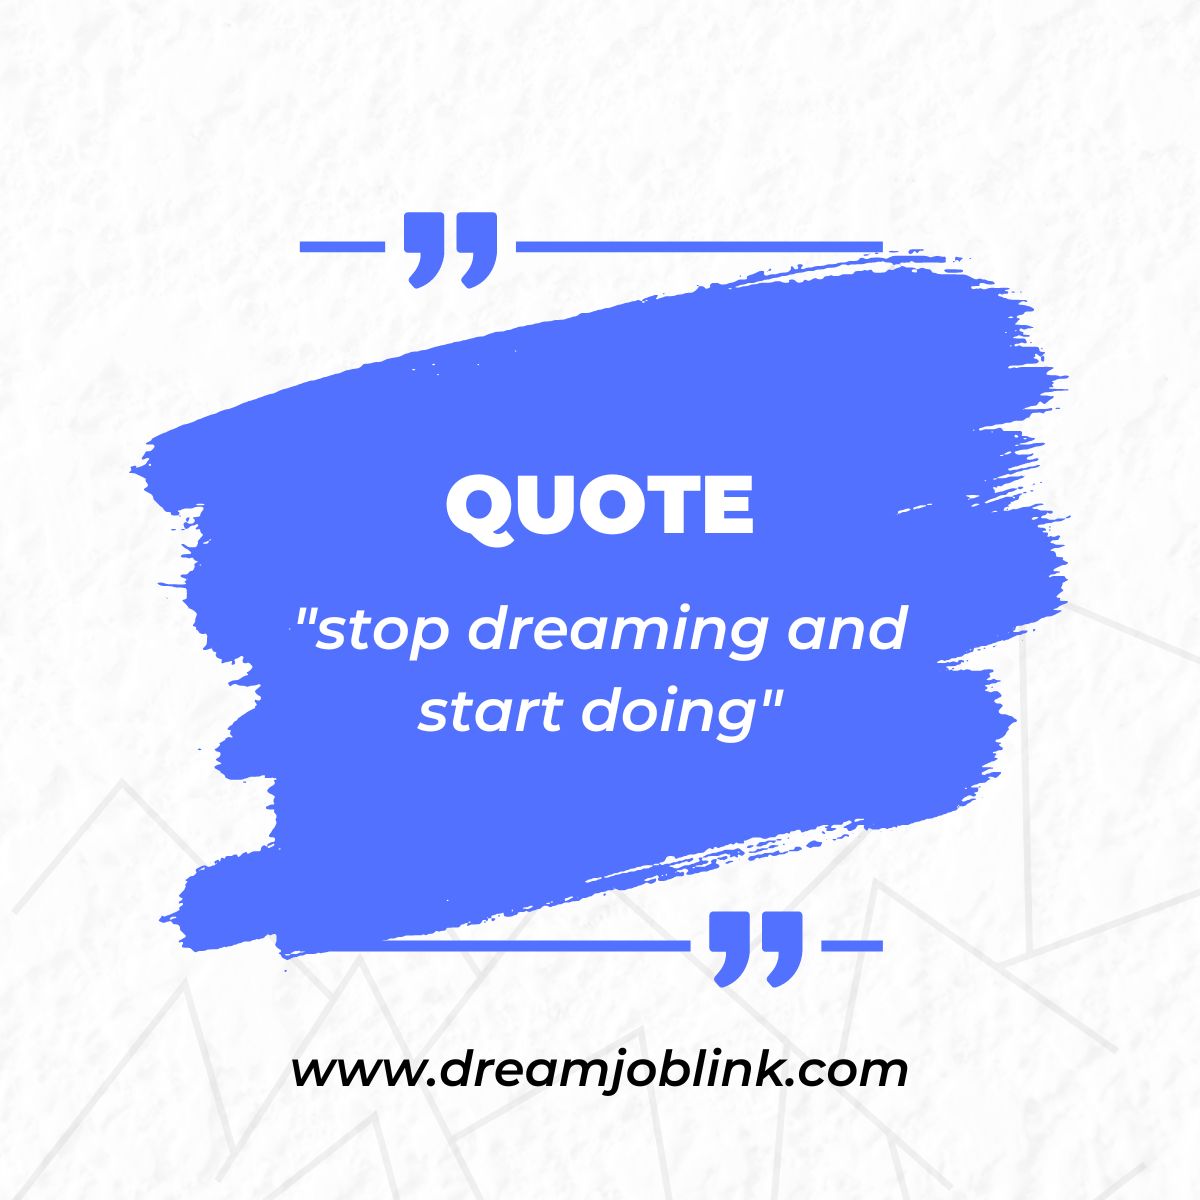 Hey guys! Please make it a norm to wake up every morning and go to DREAM JOB LINK: dreamjoblink.com & apply for three jobs every day.